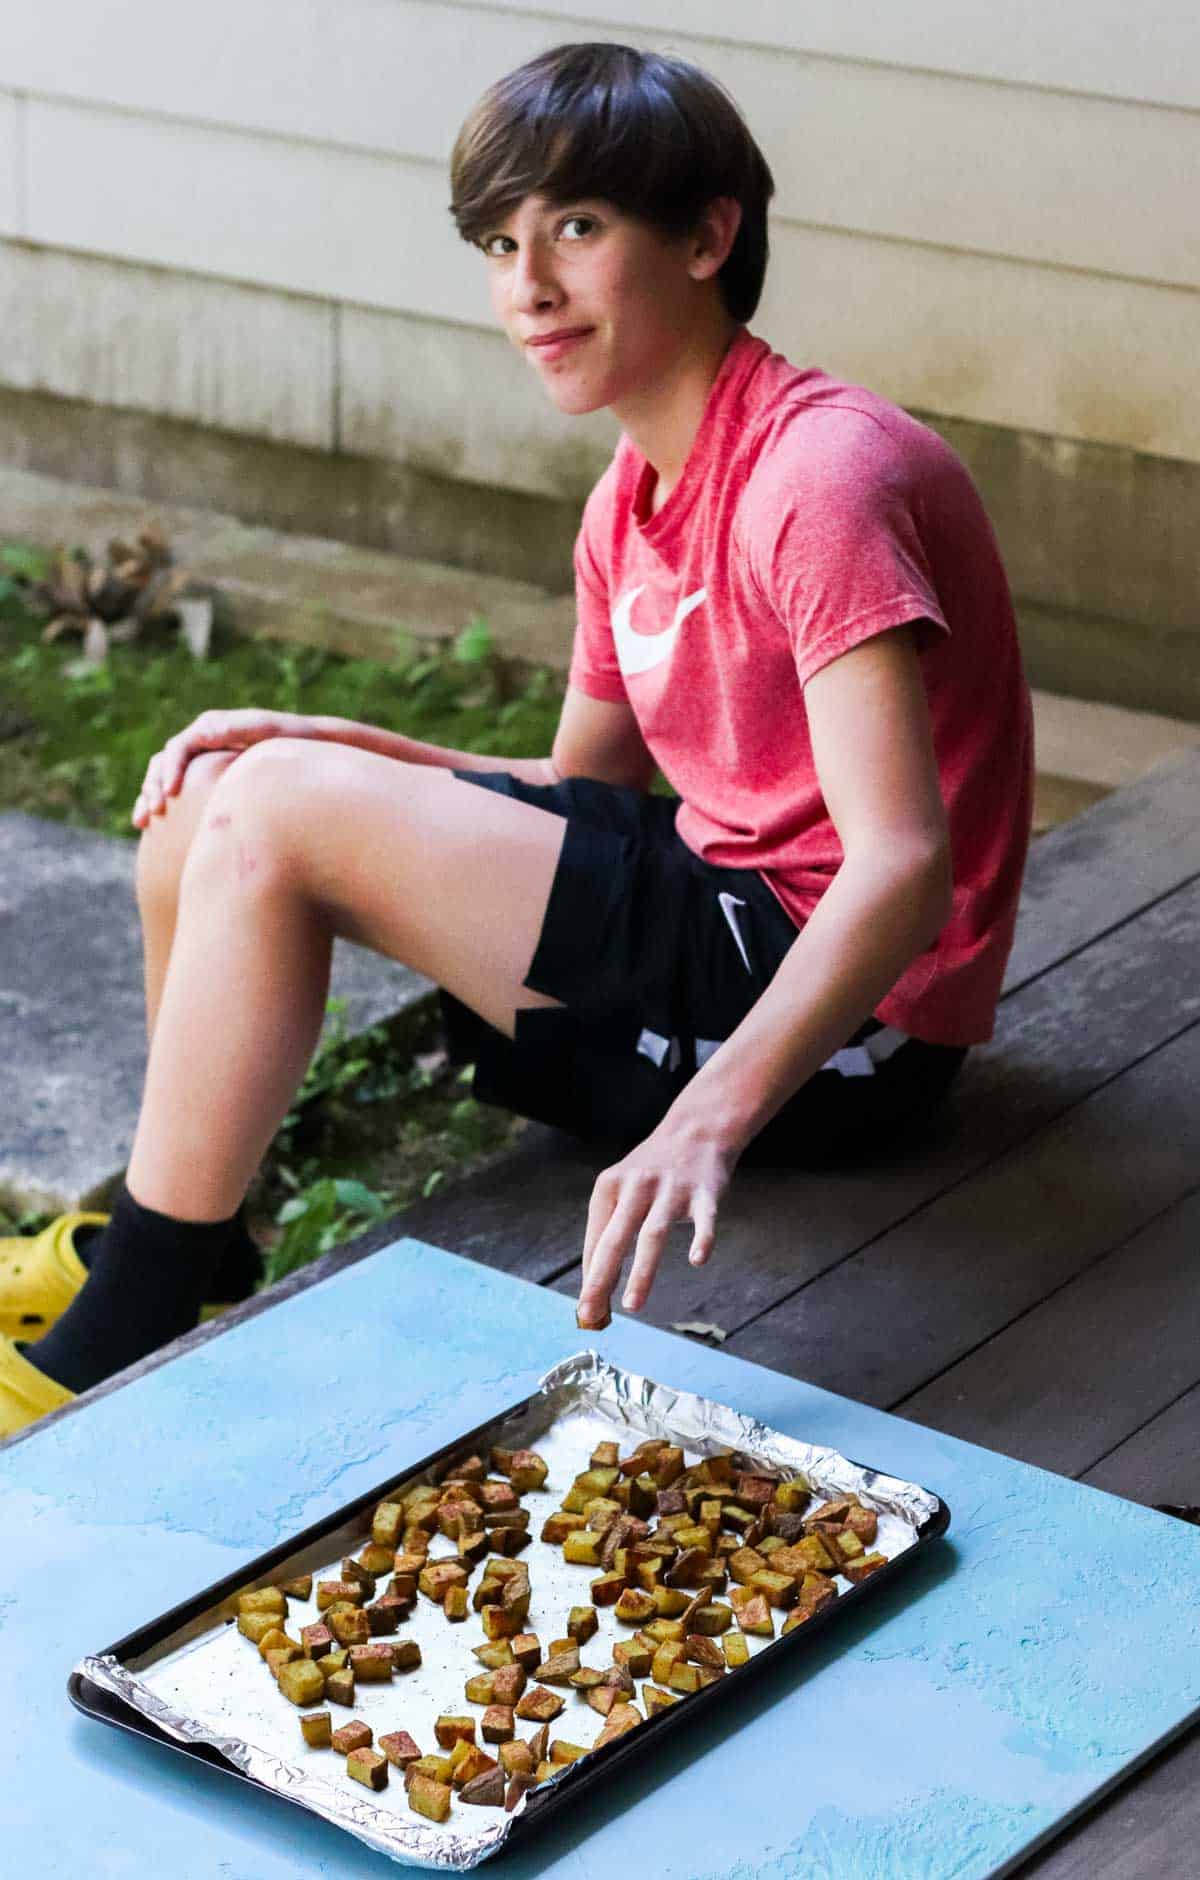 brunette teenage boy grabbing a roasted curry potato off the baking sheet sitting on a back porch.